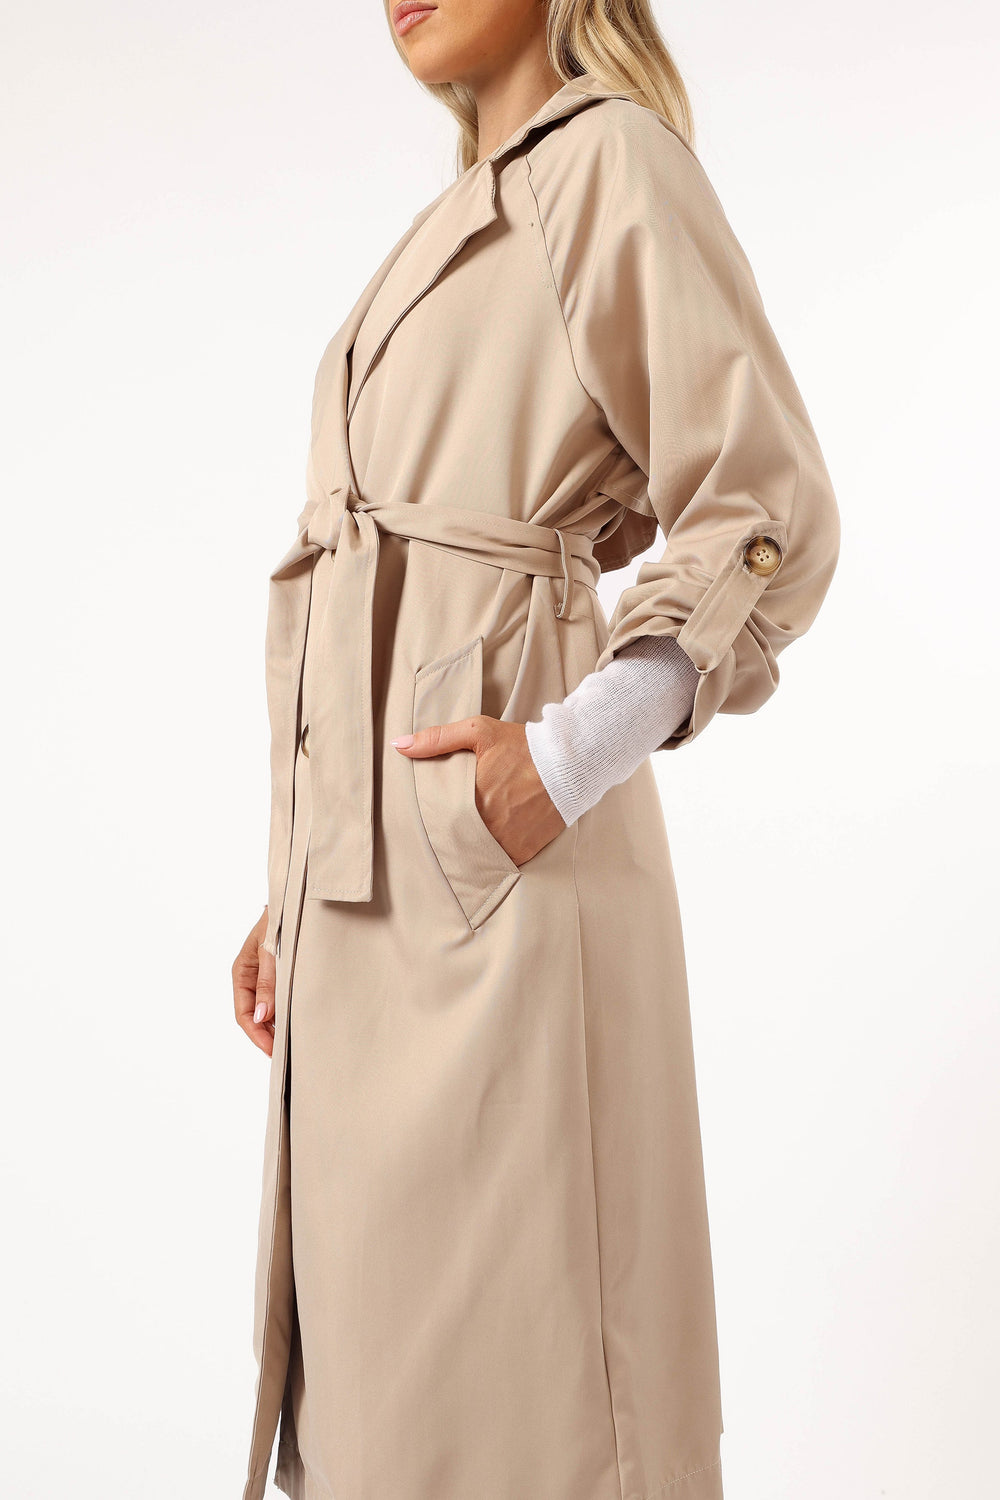 OUTERWEAR Montana Trench Coat - Beige